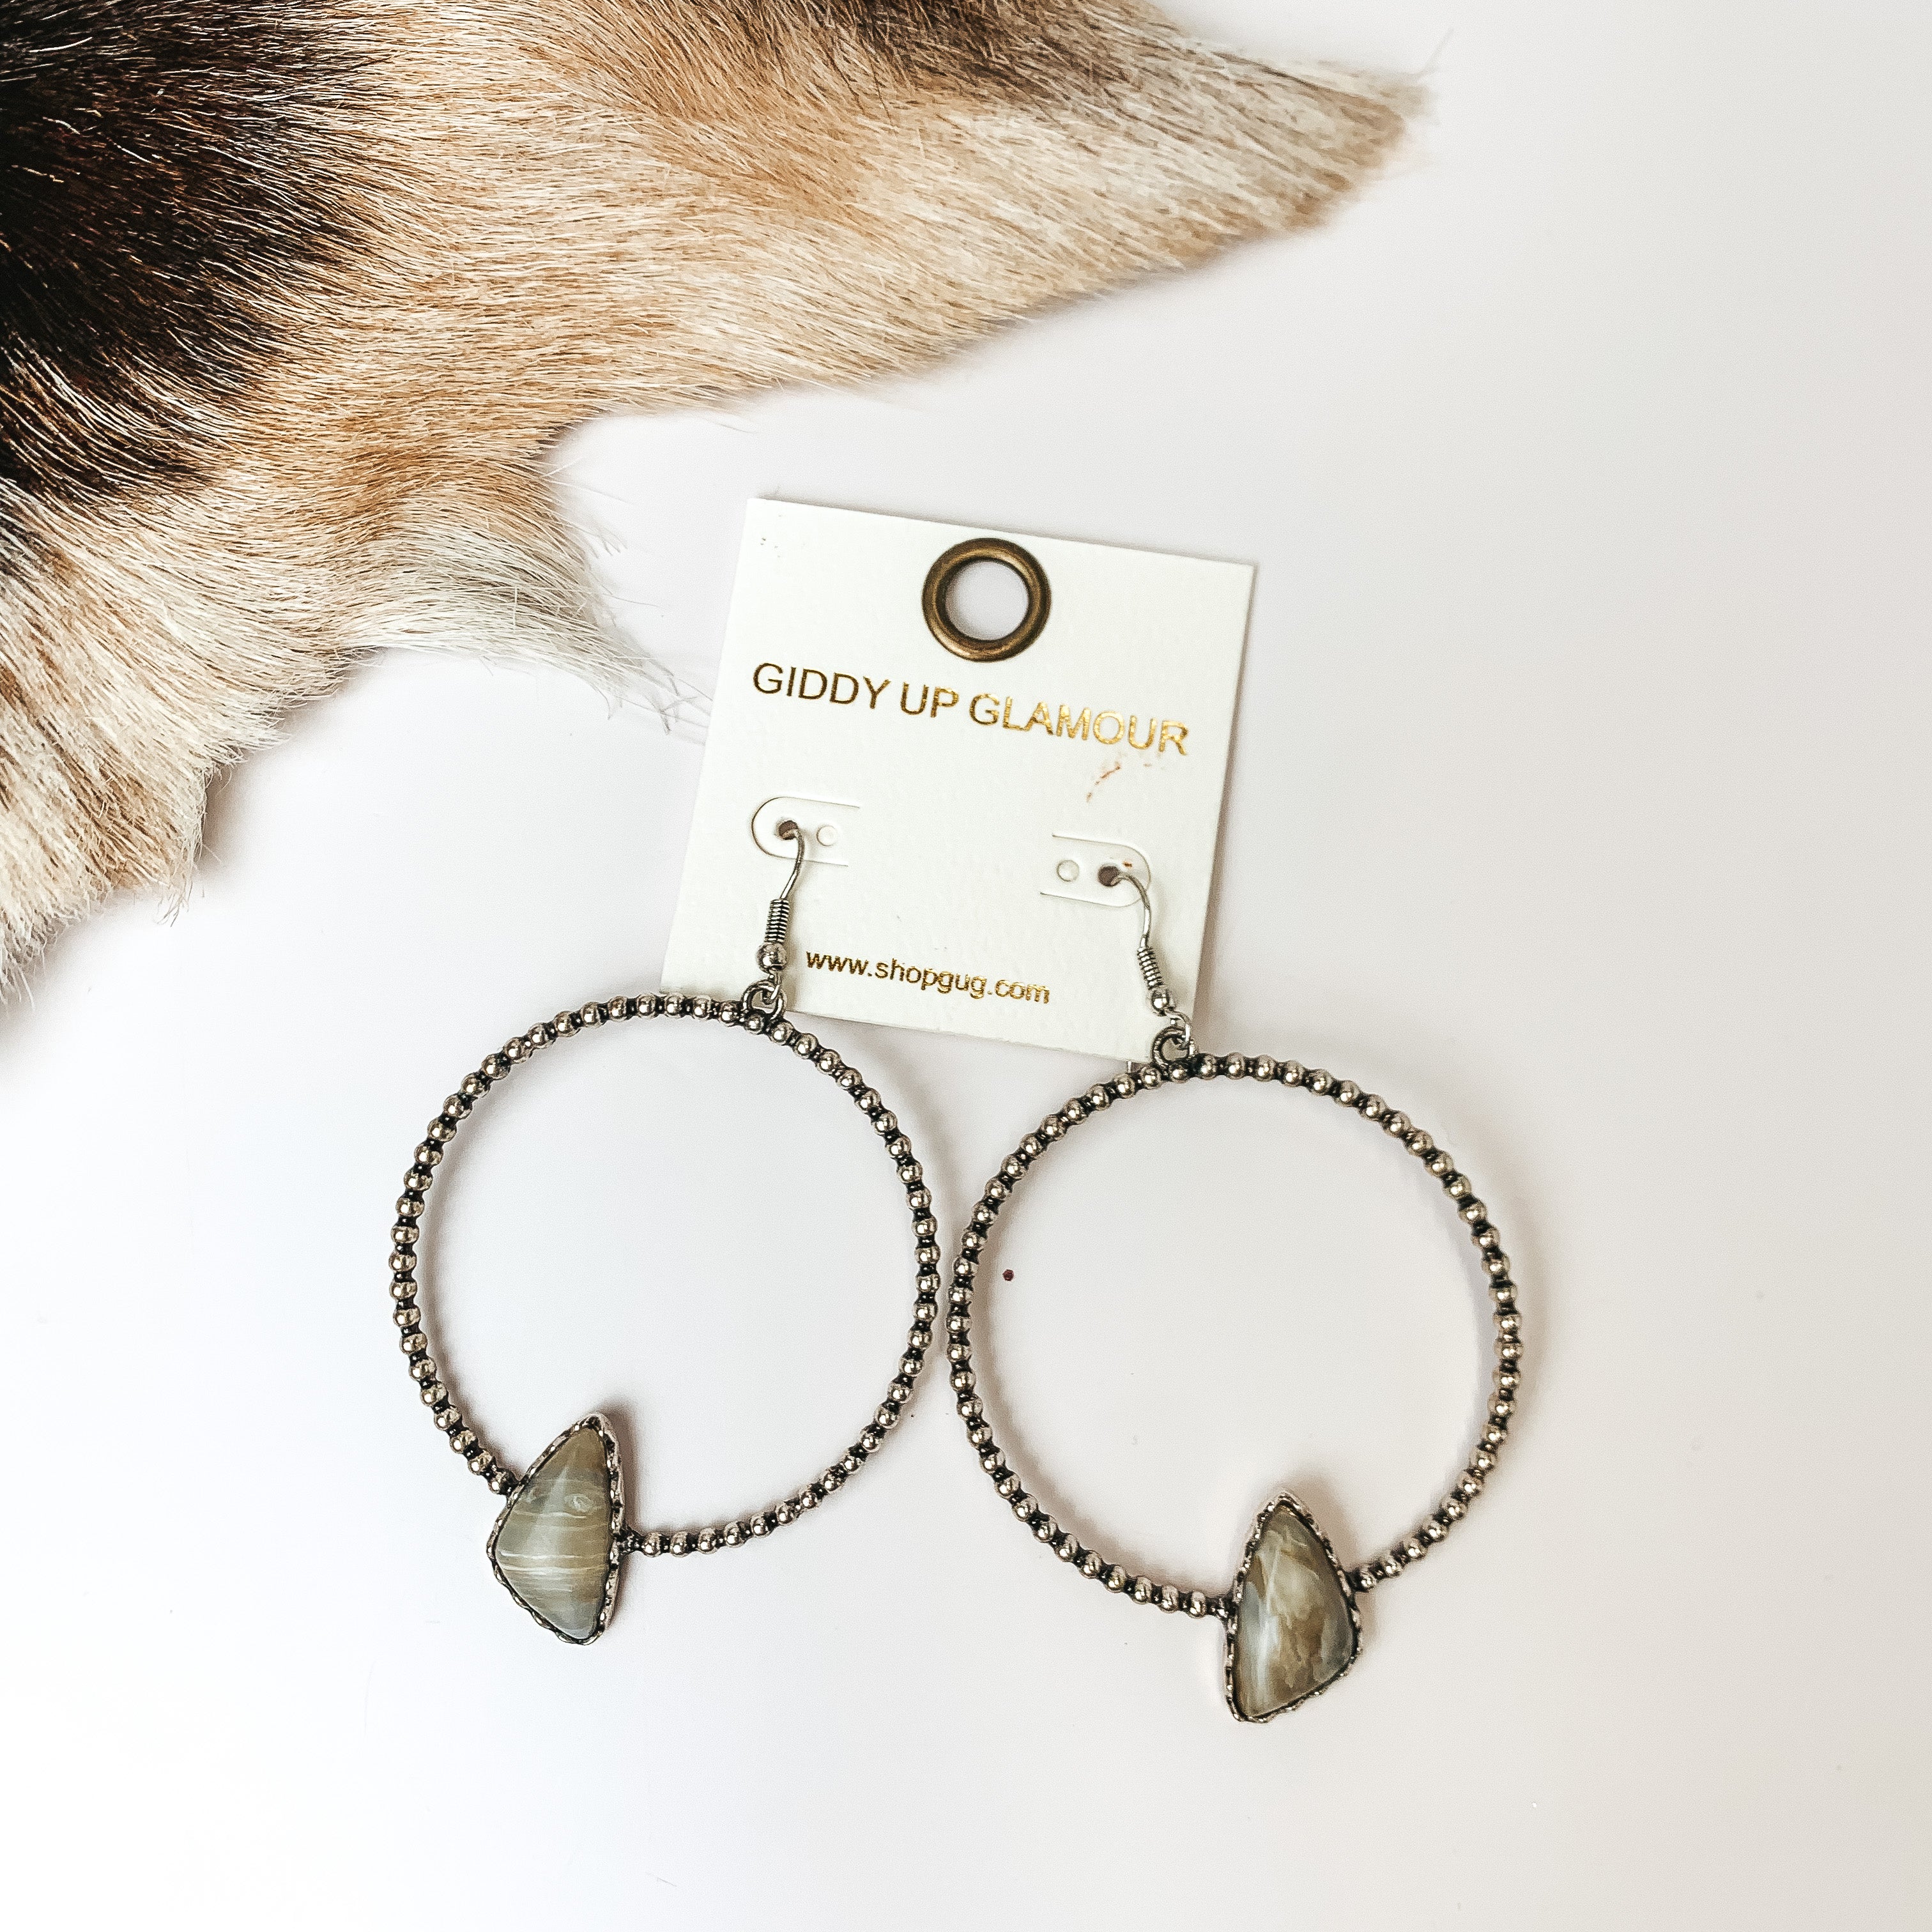 Silver Tone Textured Hoop Earring with Natural Stone. Pictured on a white background with faux animal fur to the top right. 